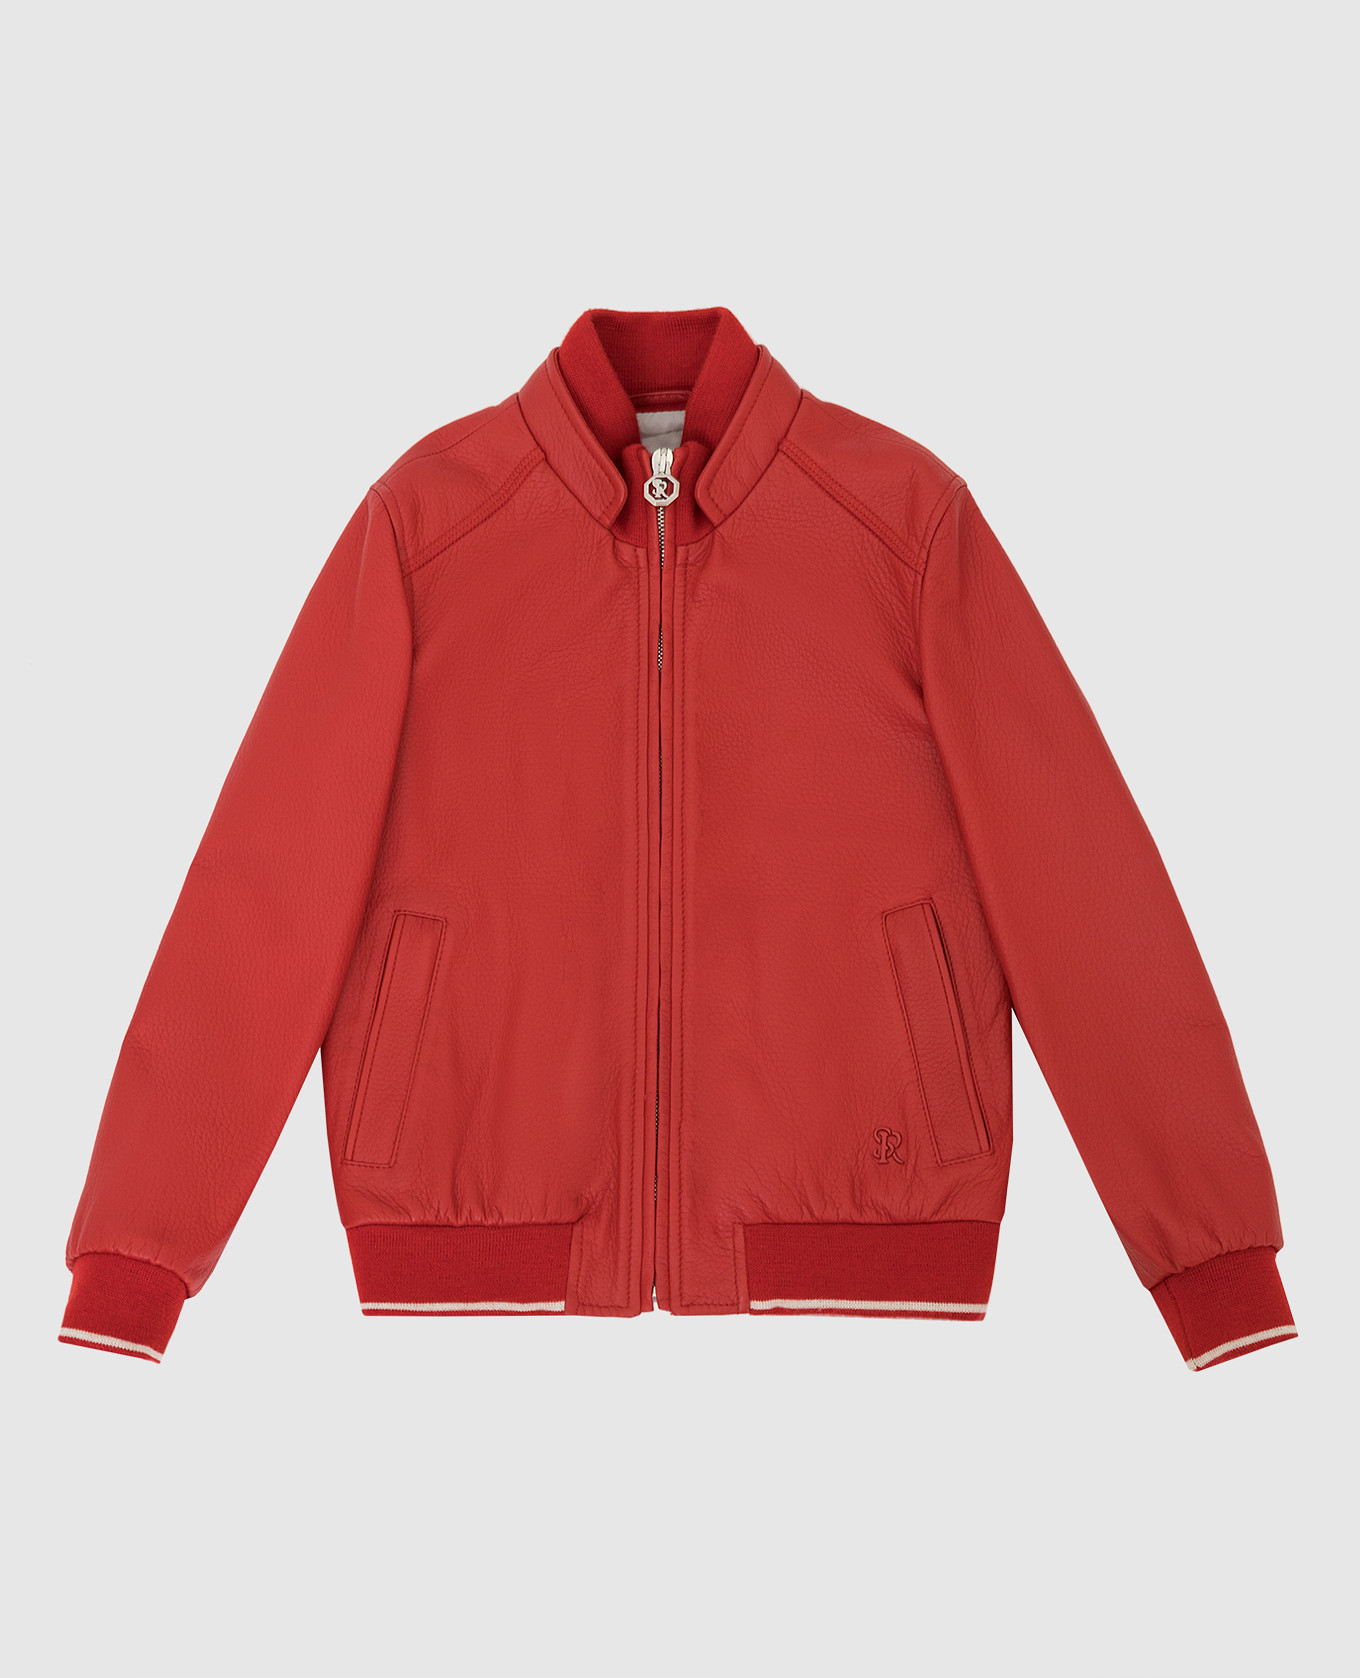 Children's red leather bomber jacket